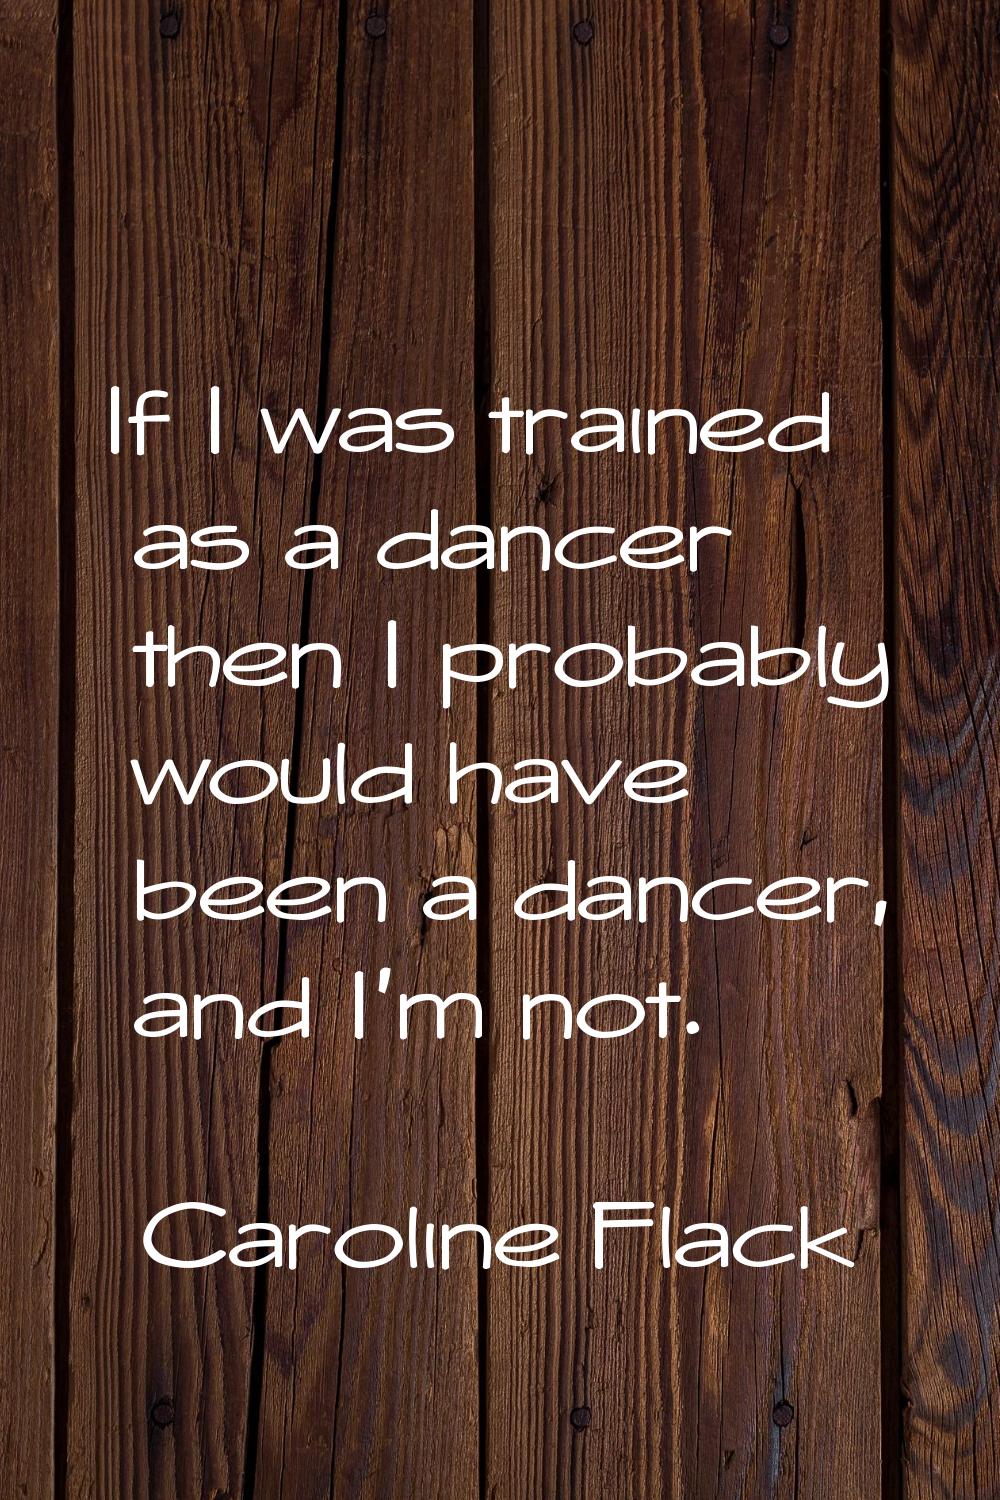 If I was trained as a dancer then I probably would have been a dancer, and I'm not.